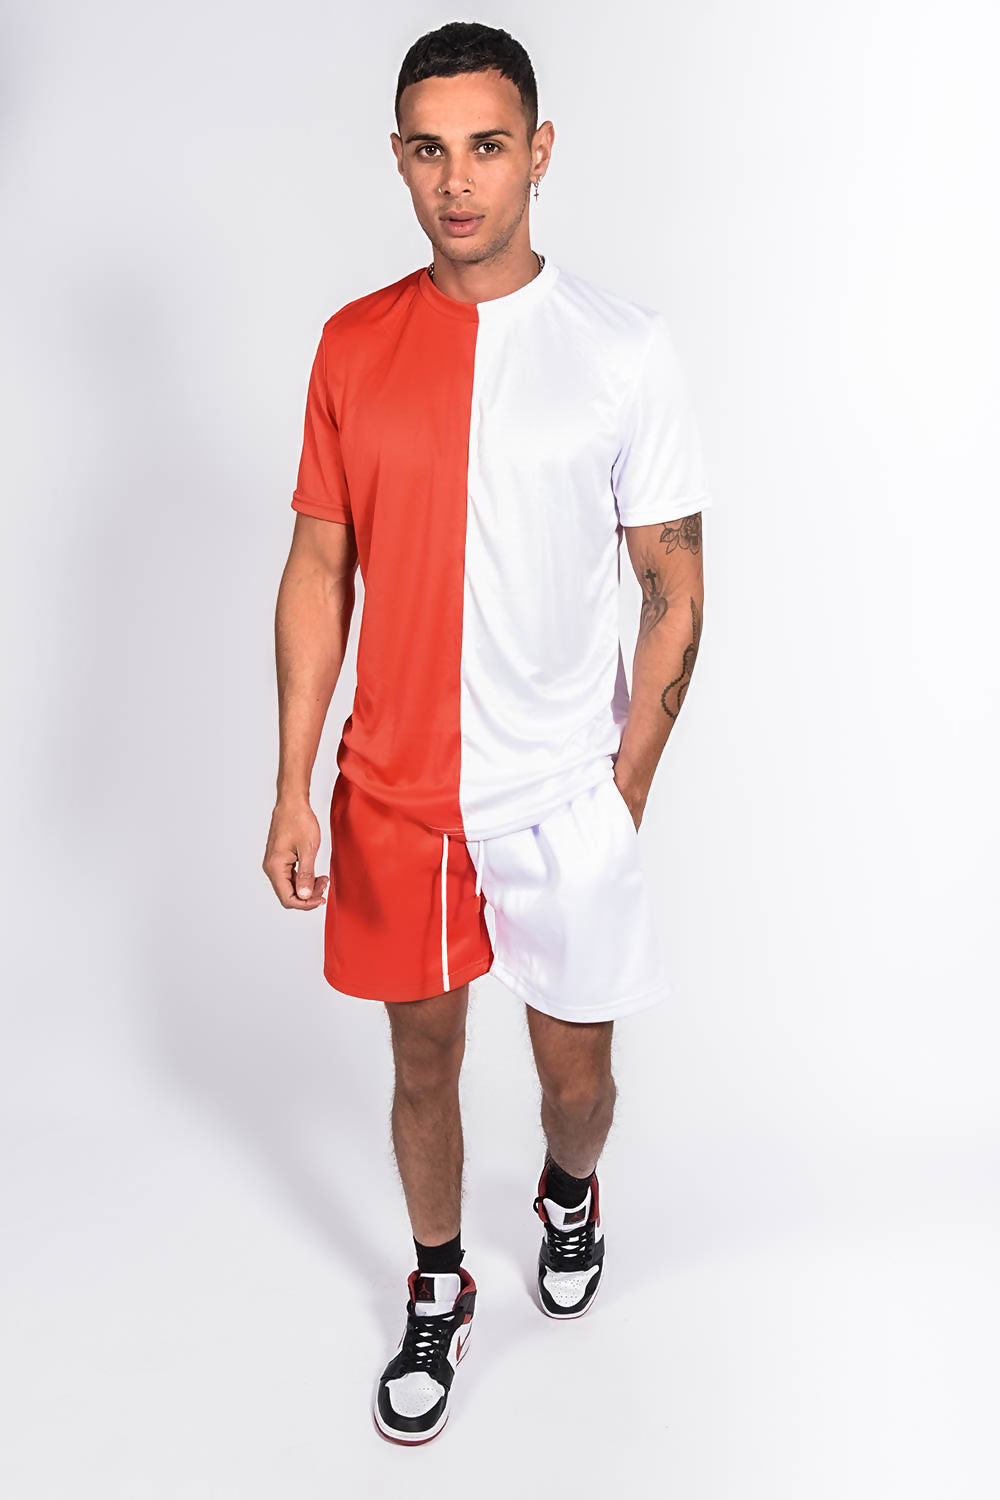 MENS COLOURBLOCK MUSCLE FIT SHORT SET RED AND WHITE